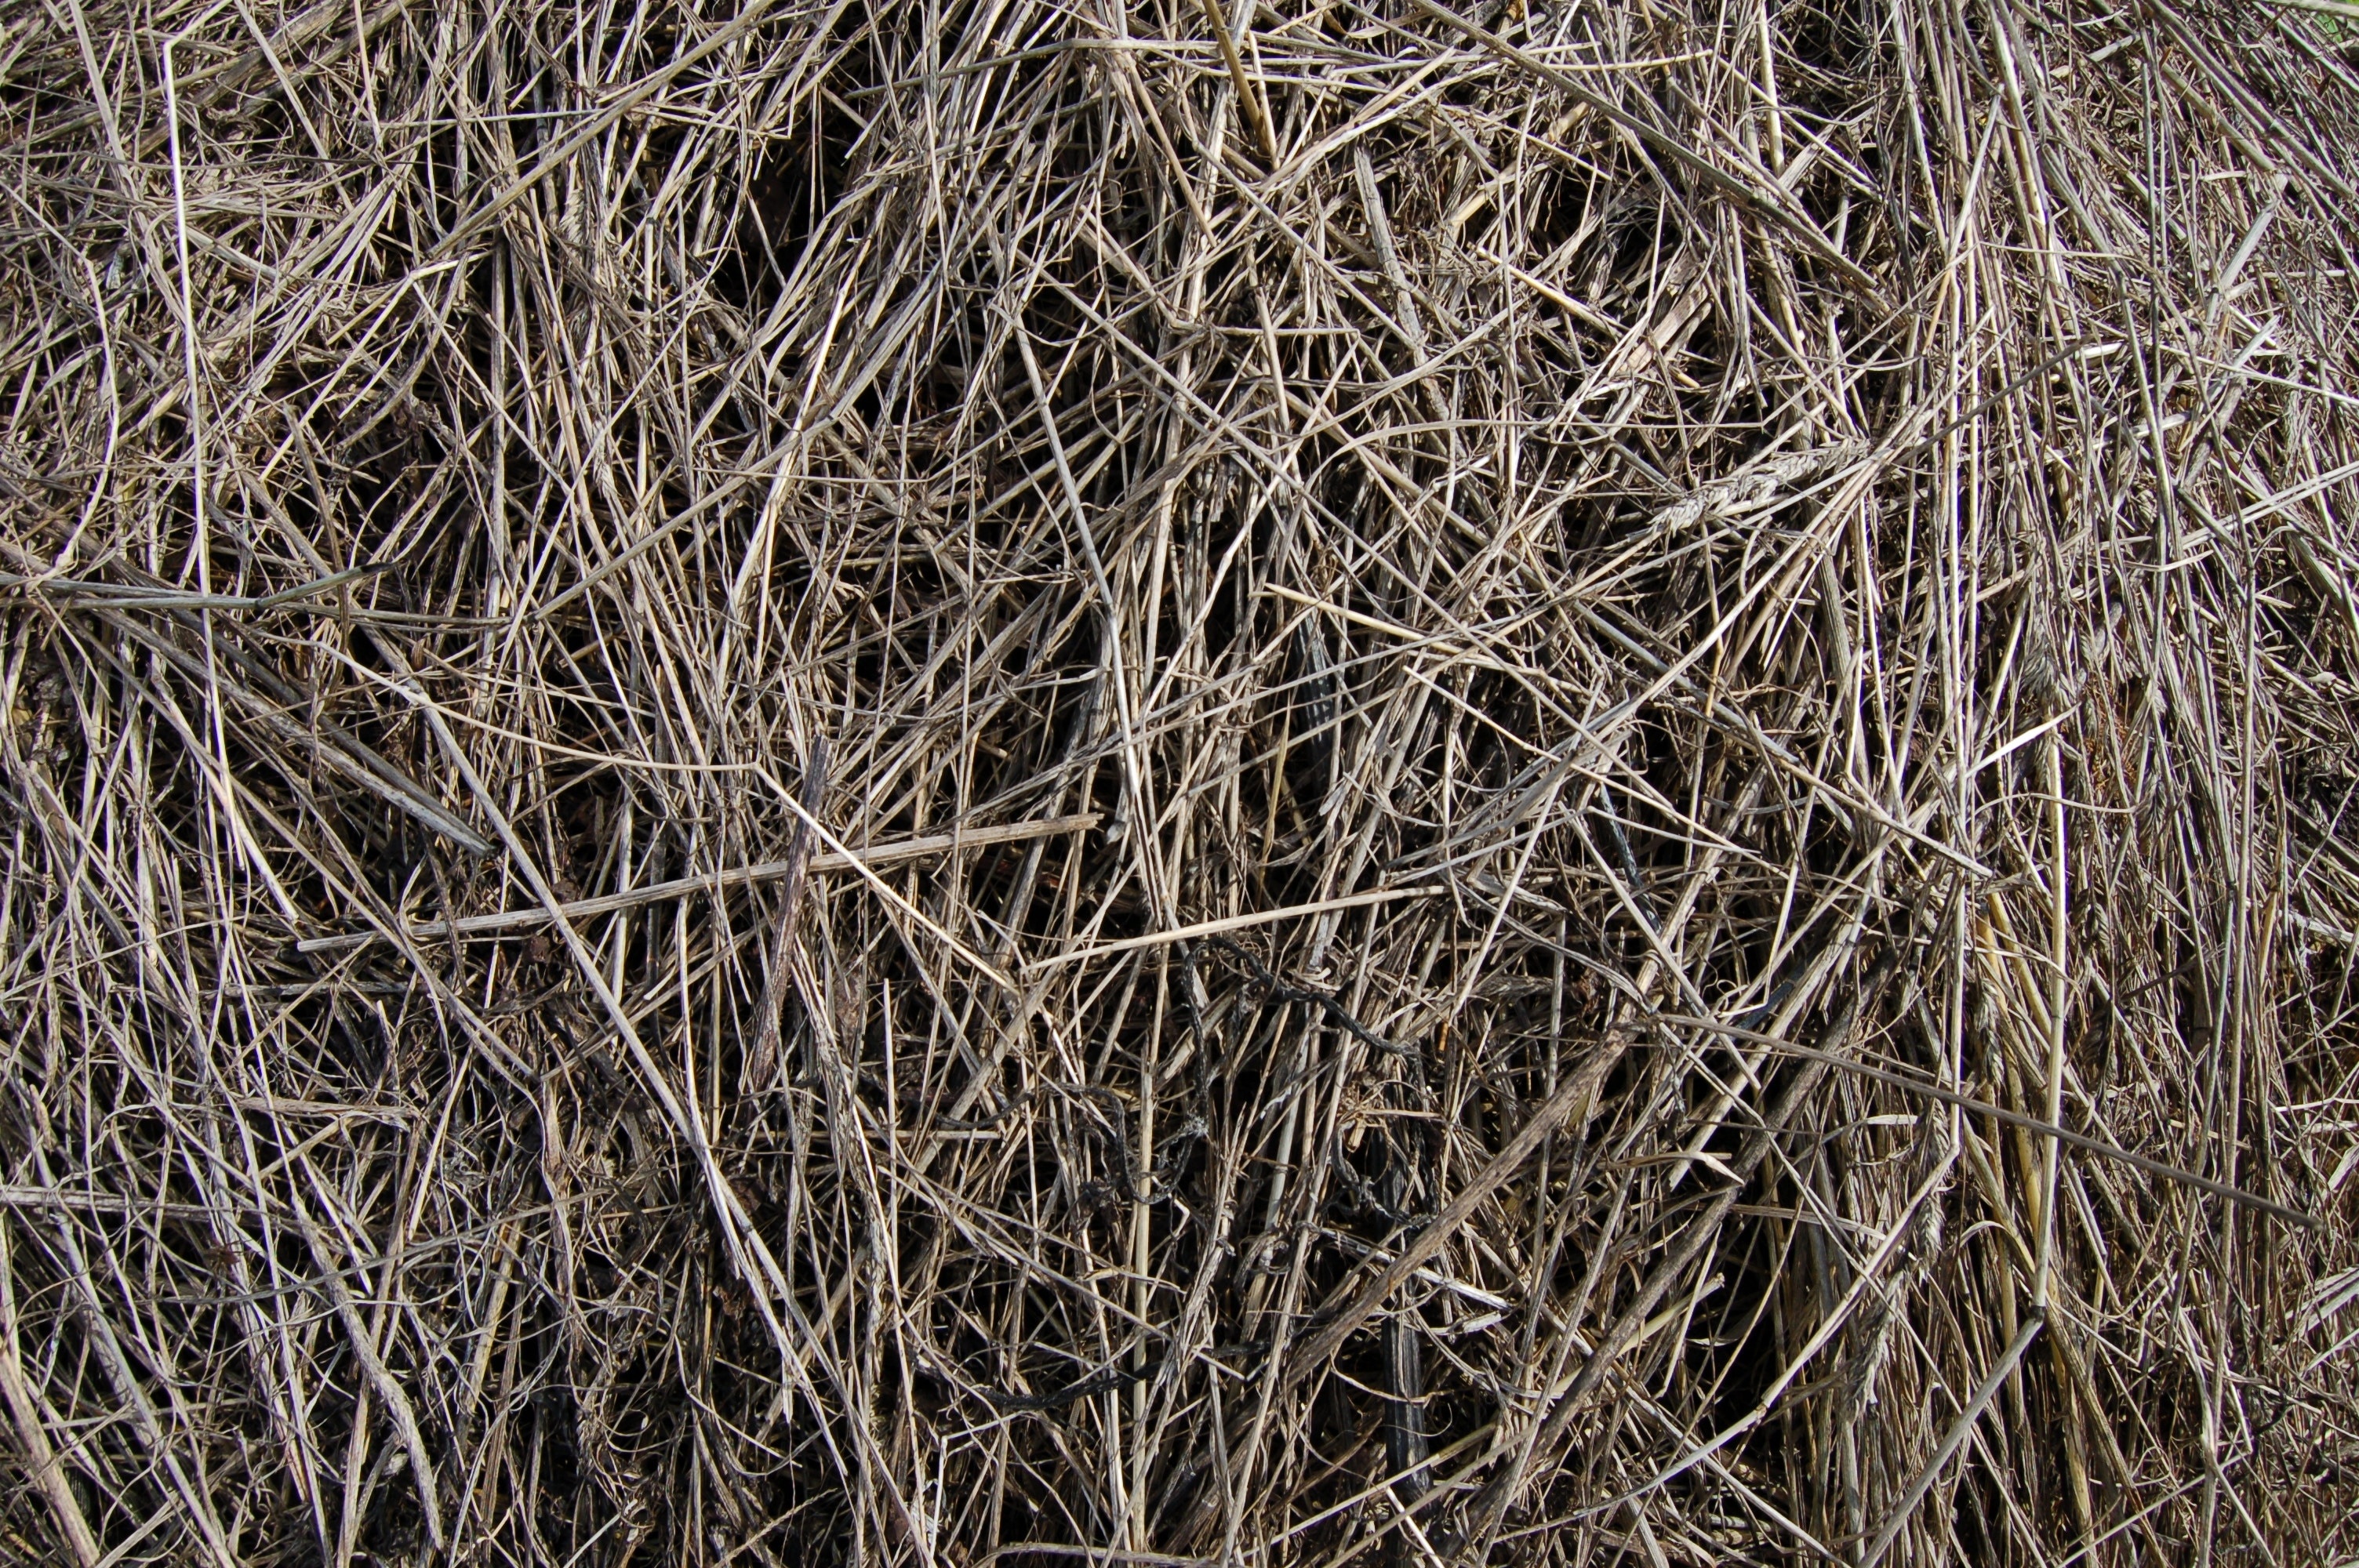 Nature, Grey, The Old Grass, Hay, backgrounds, full frame